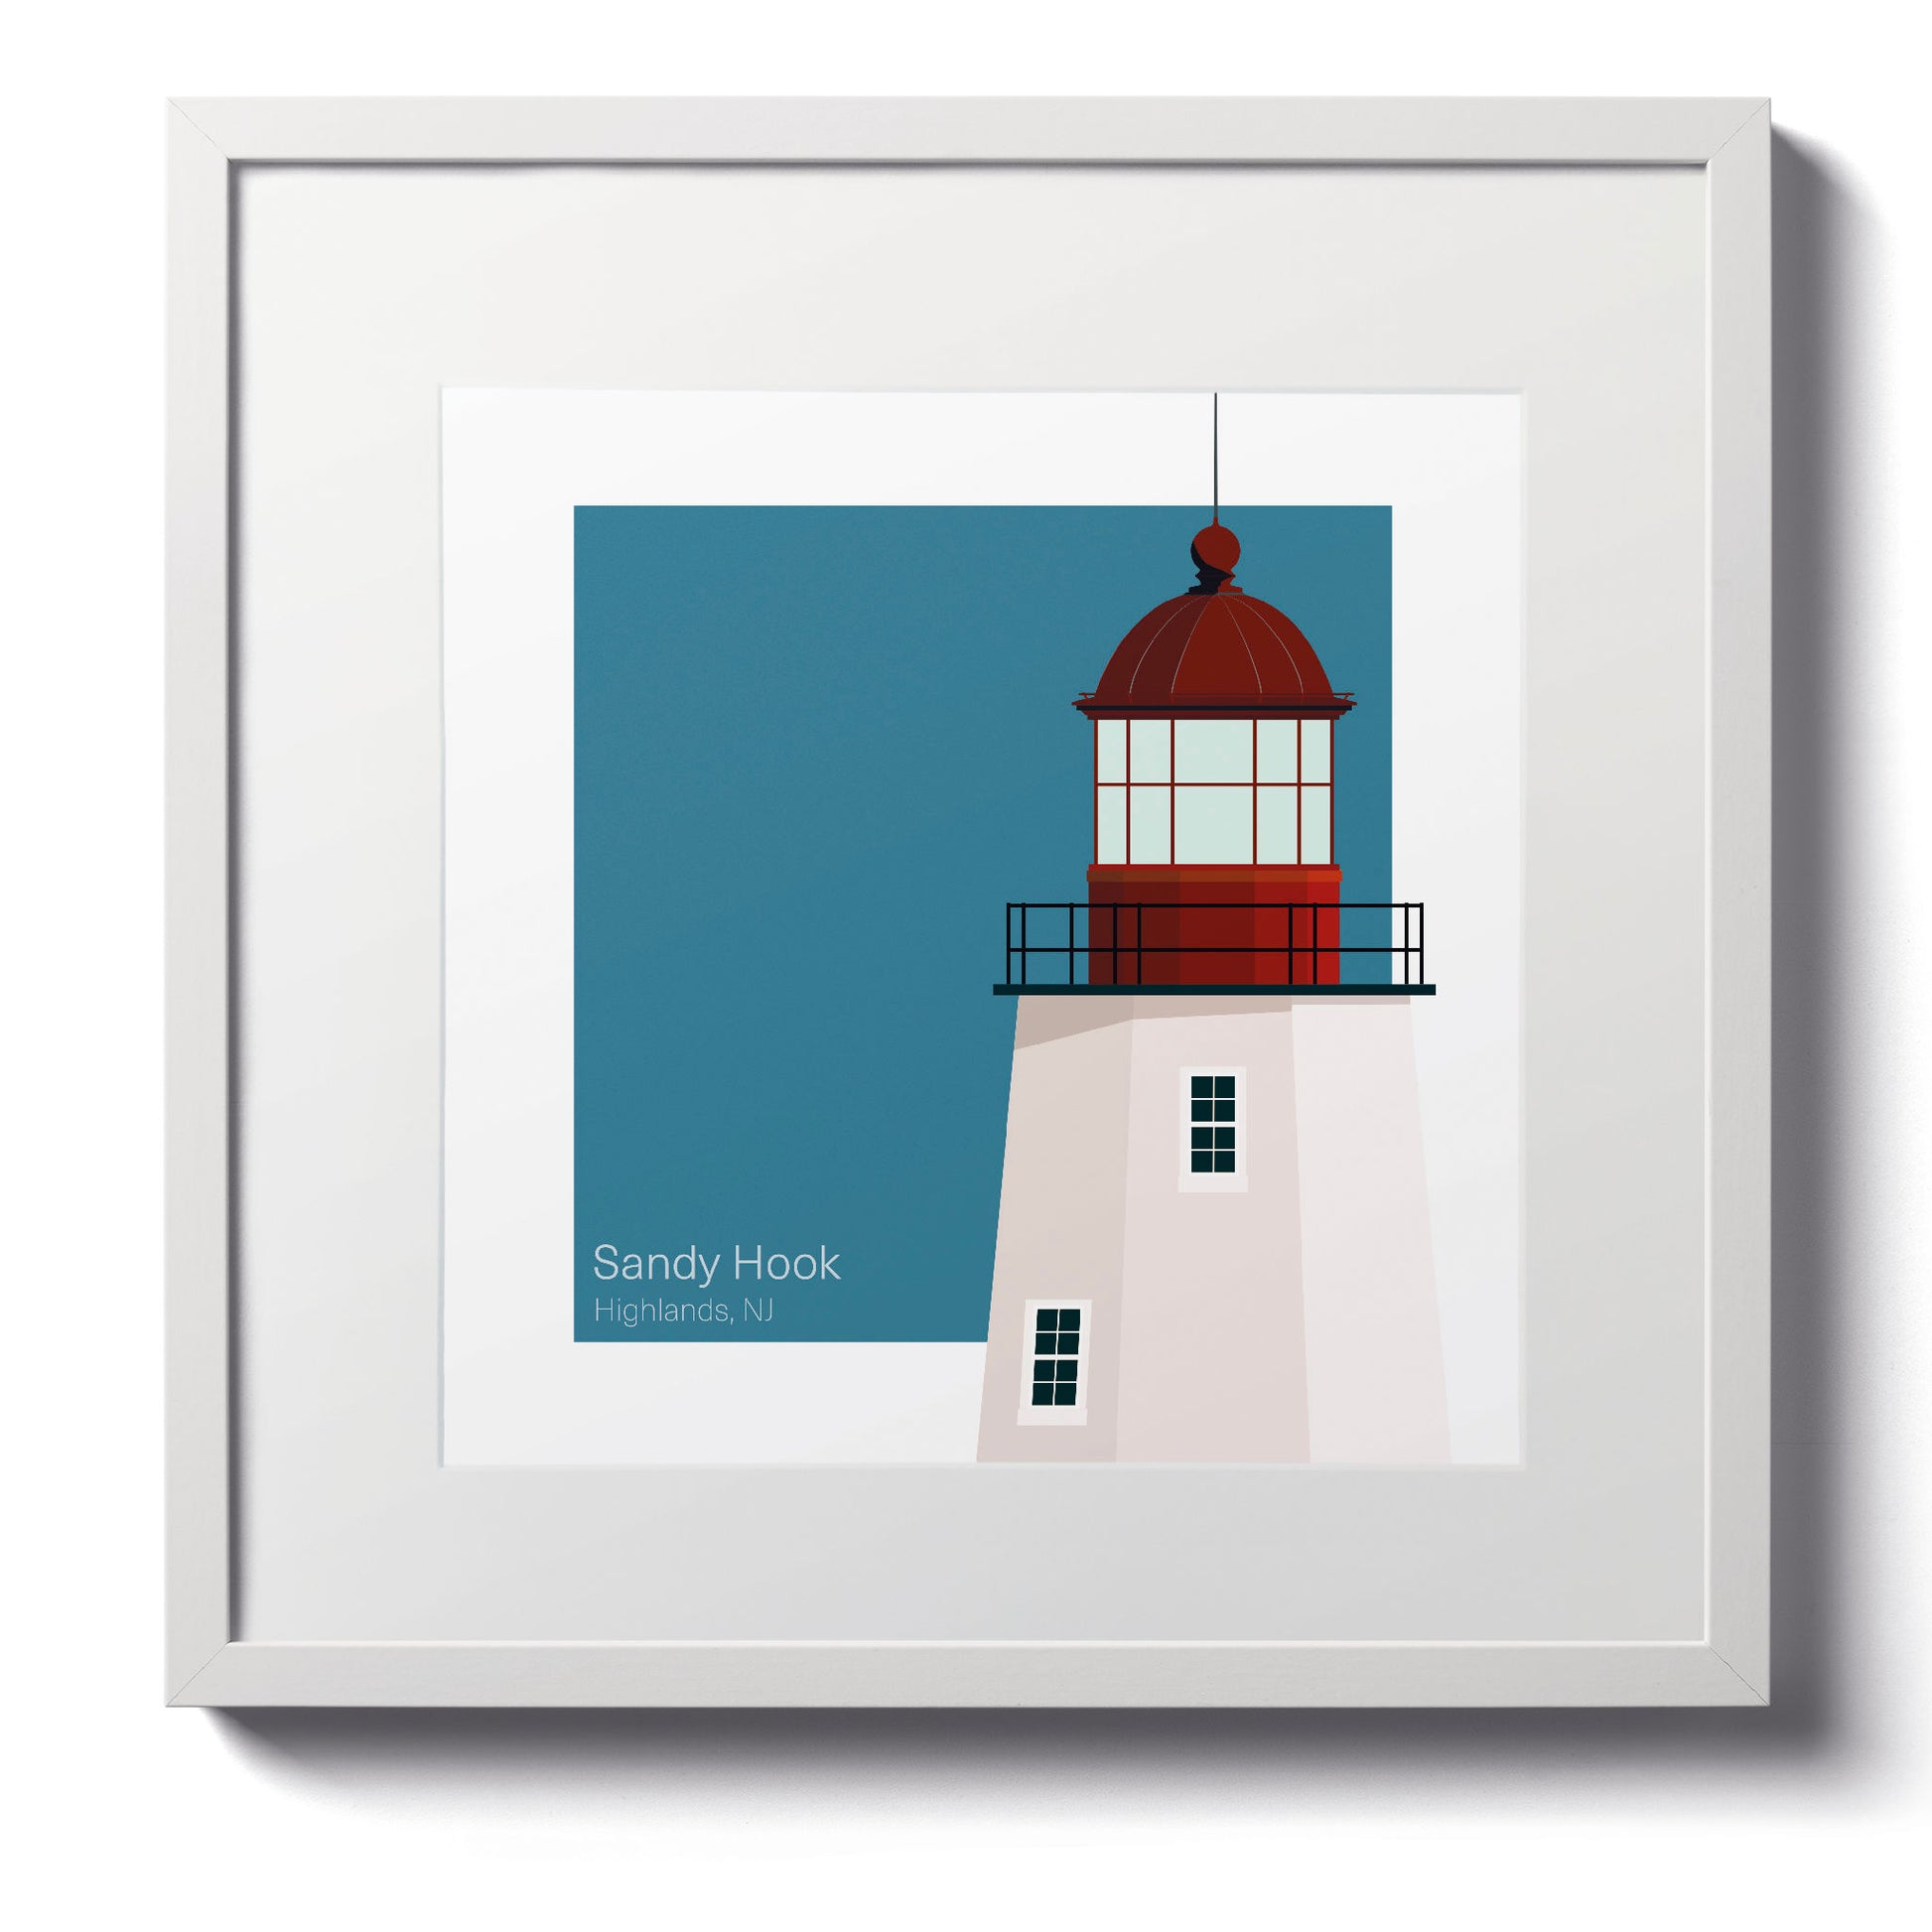 Illustration of the Sandy Hook lighthouse, NJ, USA. On a white background with aqua blue square as a backdrop., in a white frame  and measuring 12"x12" (30x30cm).